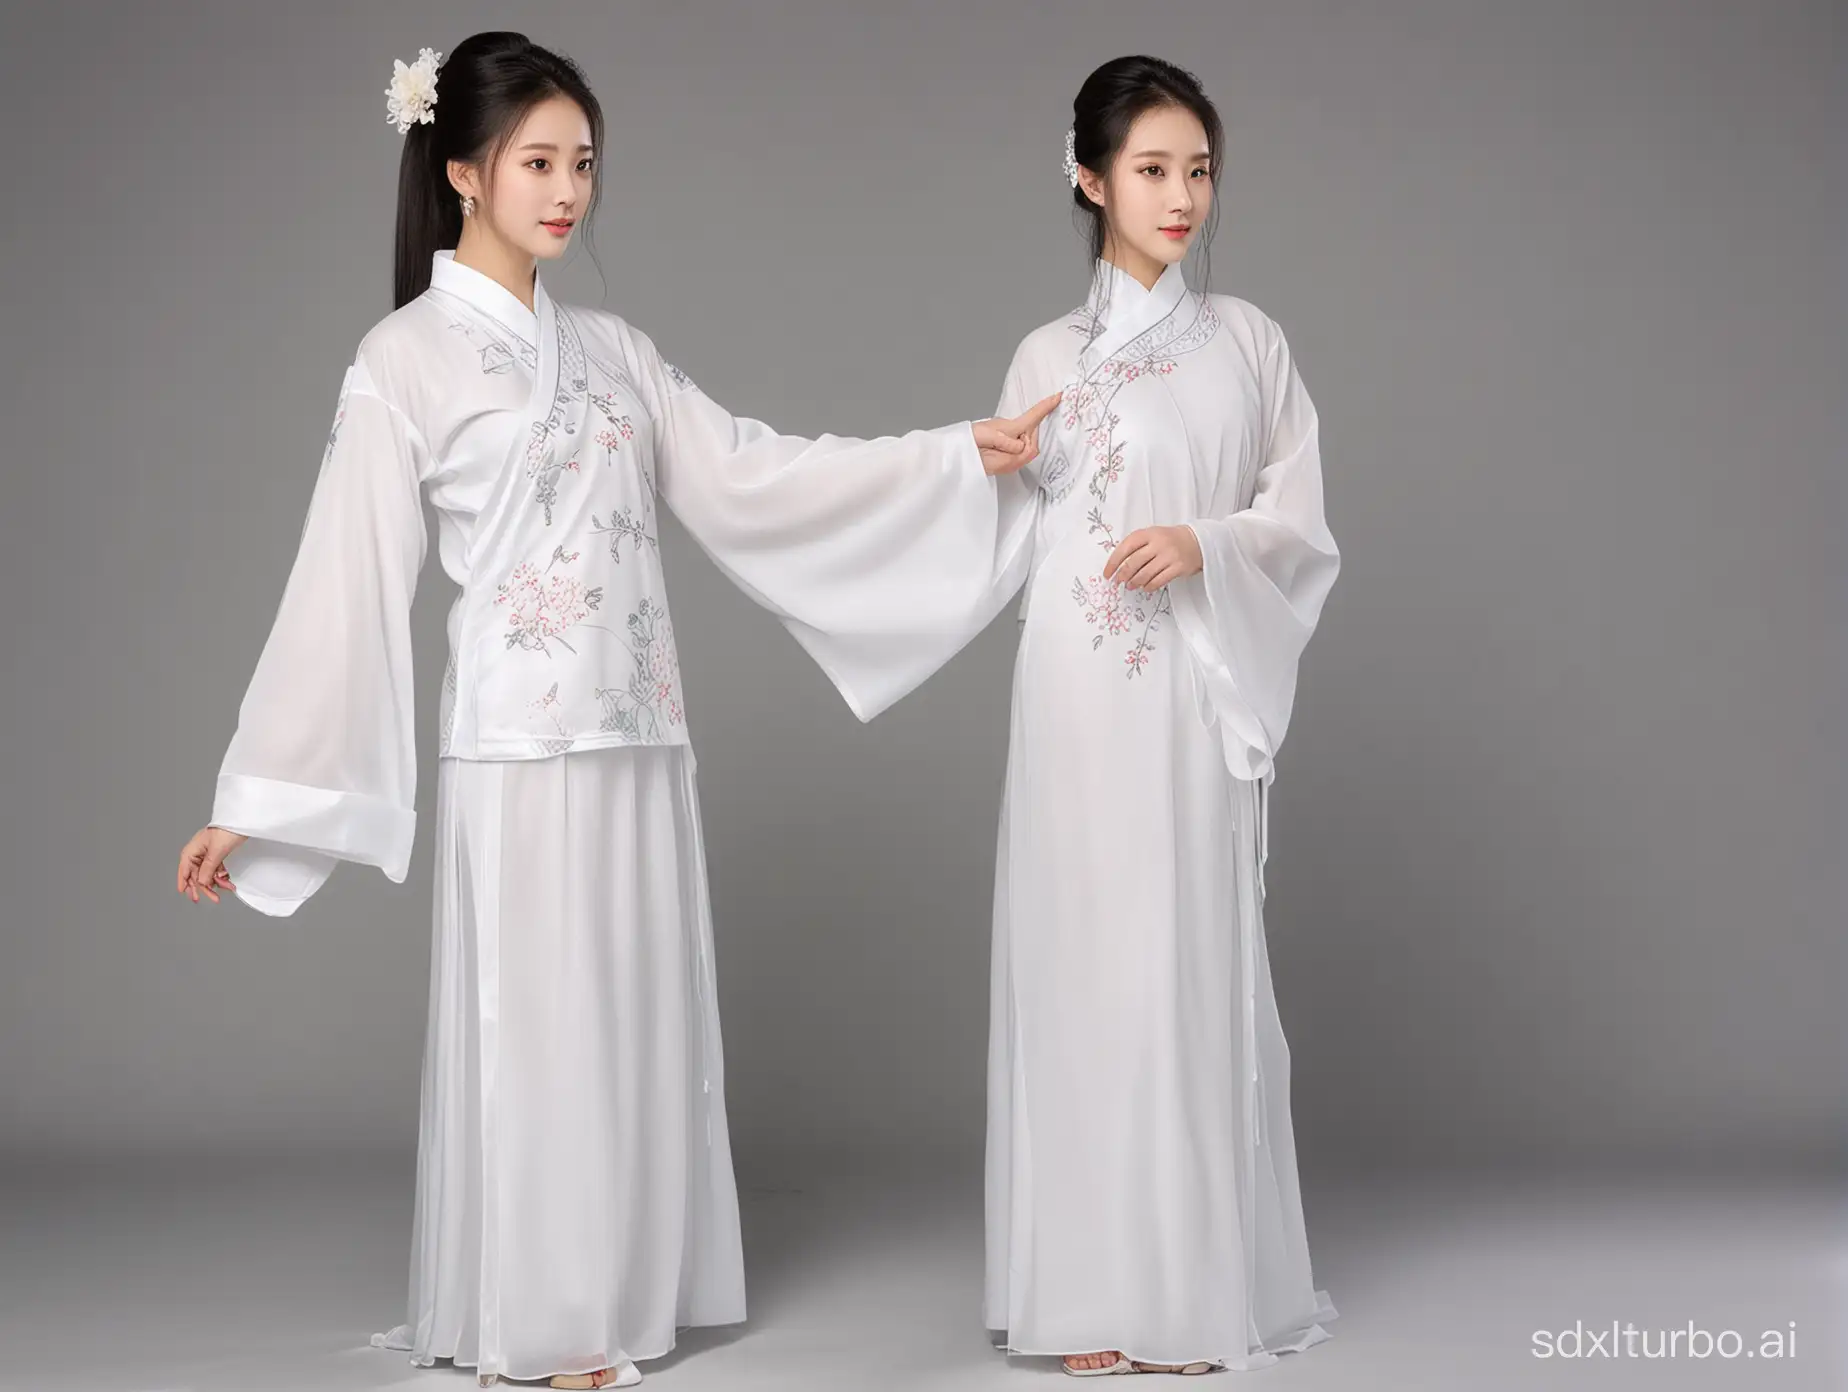 A 173CM Chinese girl wearing white traditional Chinese clothing, with a normal figure.